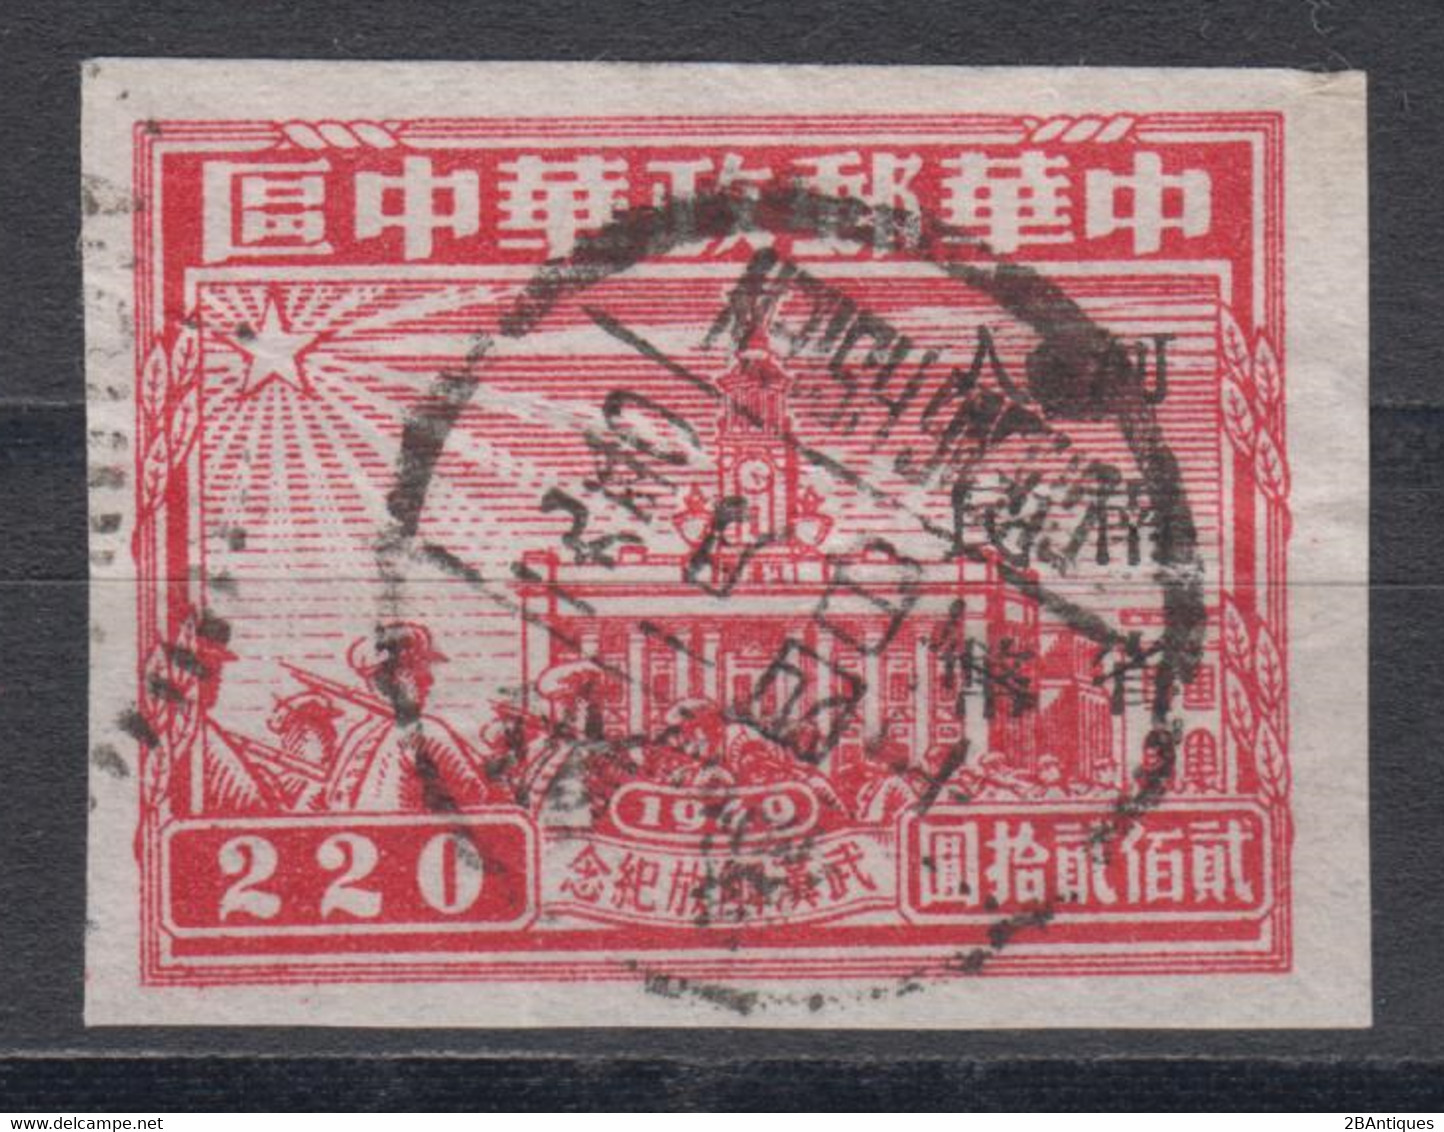 CENTRAL CHINA 1949 -  Liberation Of Hankau, Hanyang & Wuchang IMPERFORATE WITH OVERPRINT - Central China 1948-49